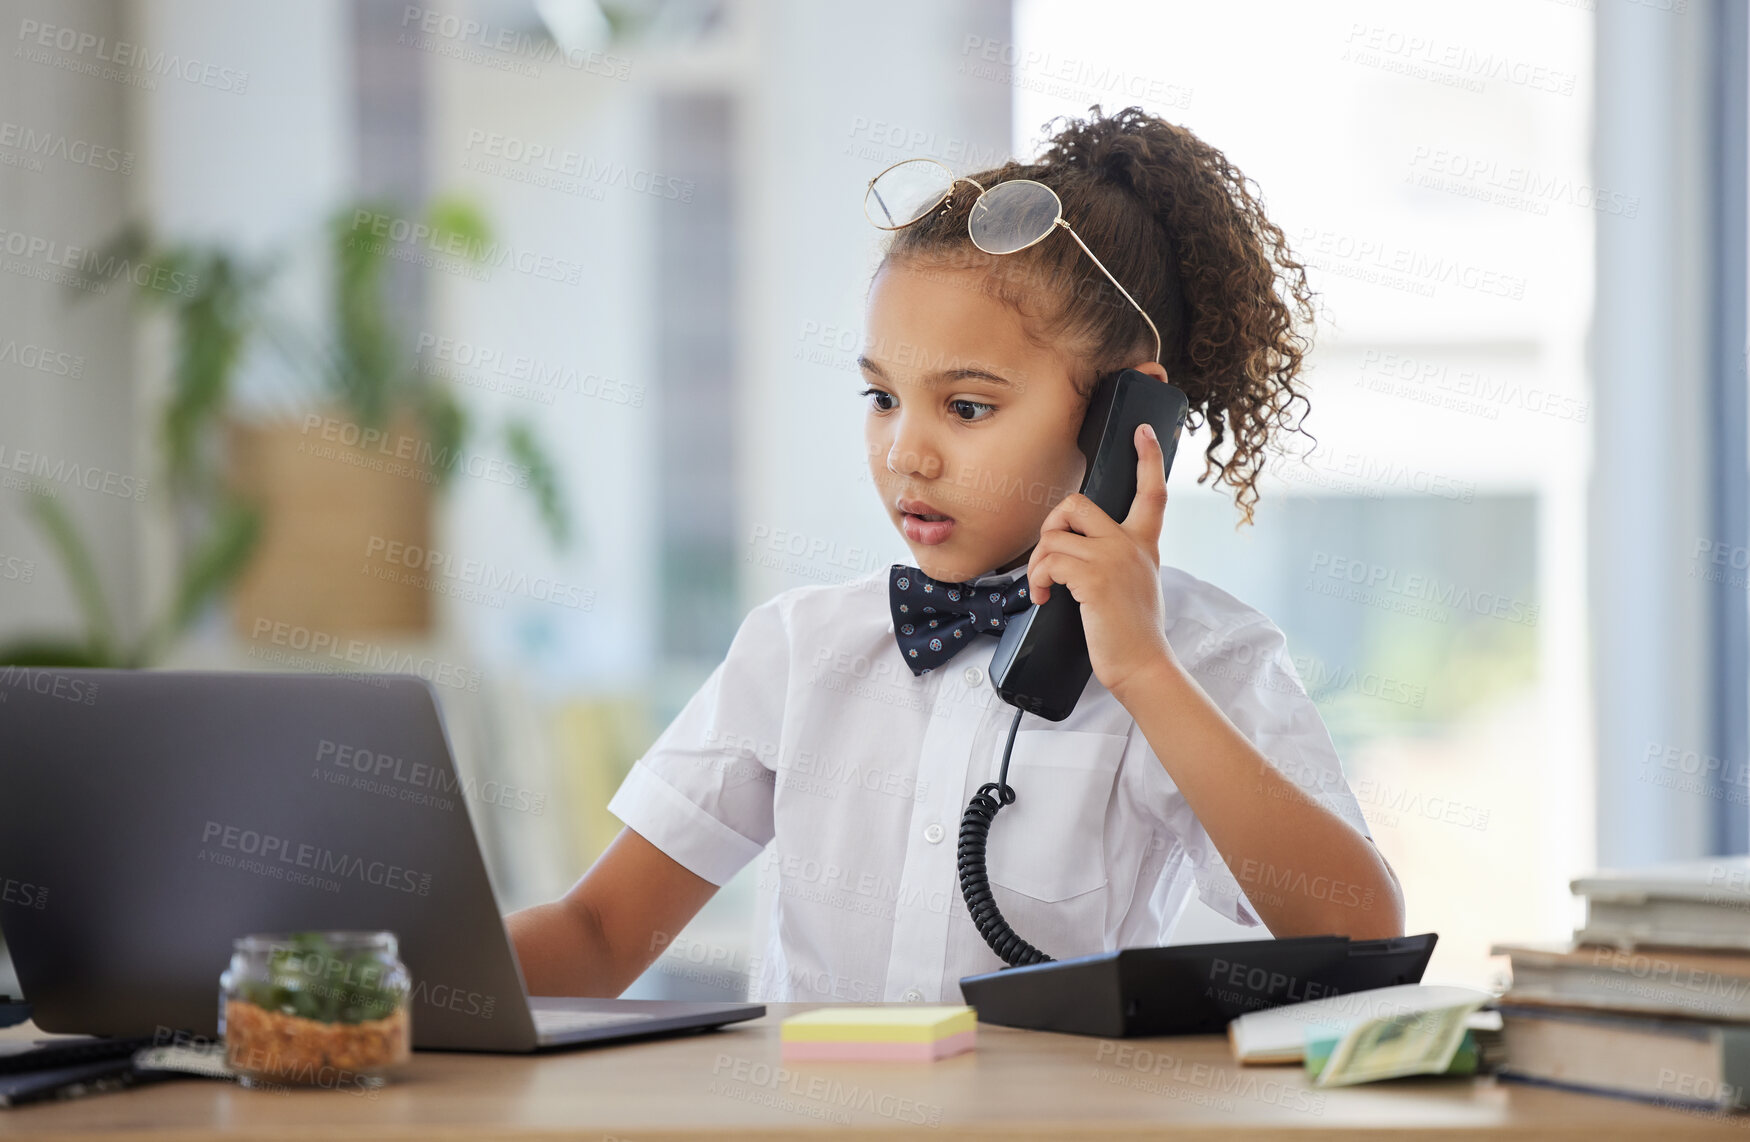 Buy stock photo Children, telephone and a girl having fun in an office as a fantasy businesswoman at work on a laptop. Kids, phone call and a female child working at a desk while using her imagination to pretend